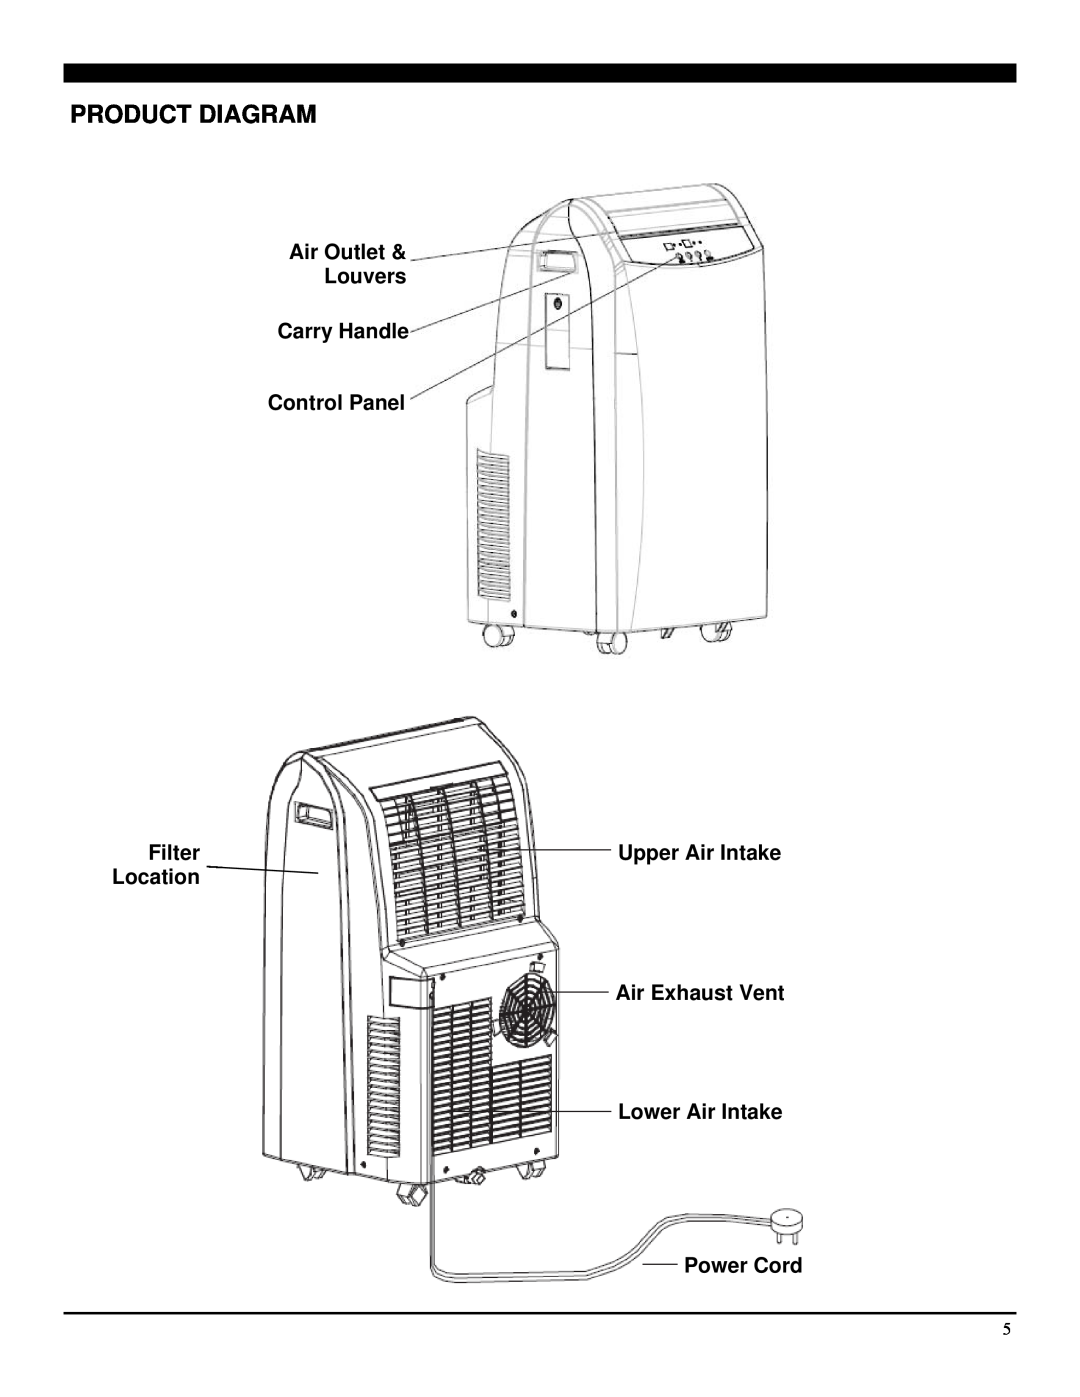 Soleus Air GM-PAC-12E1HP manual Product Diagram, Air Outlet & Louvers Carry Handle Control Panel, Filter, Upper Air Intake 